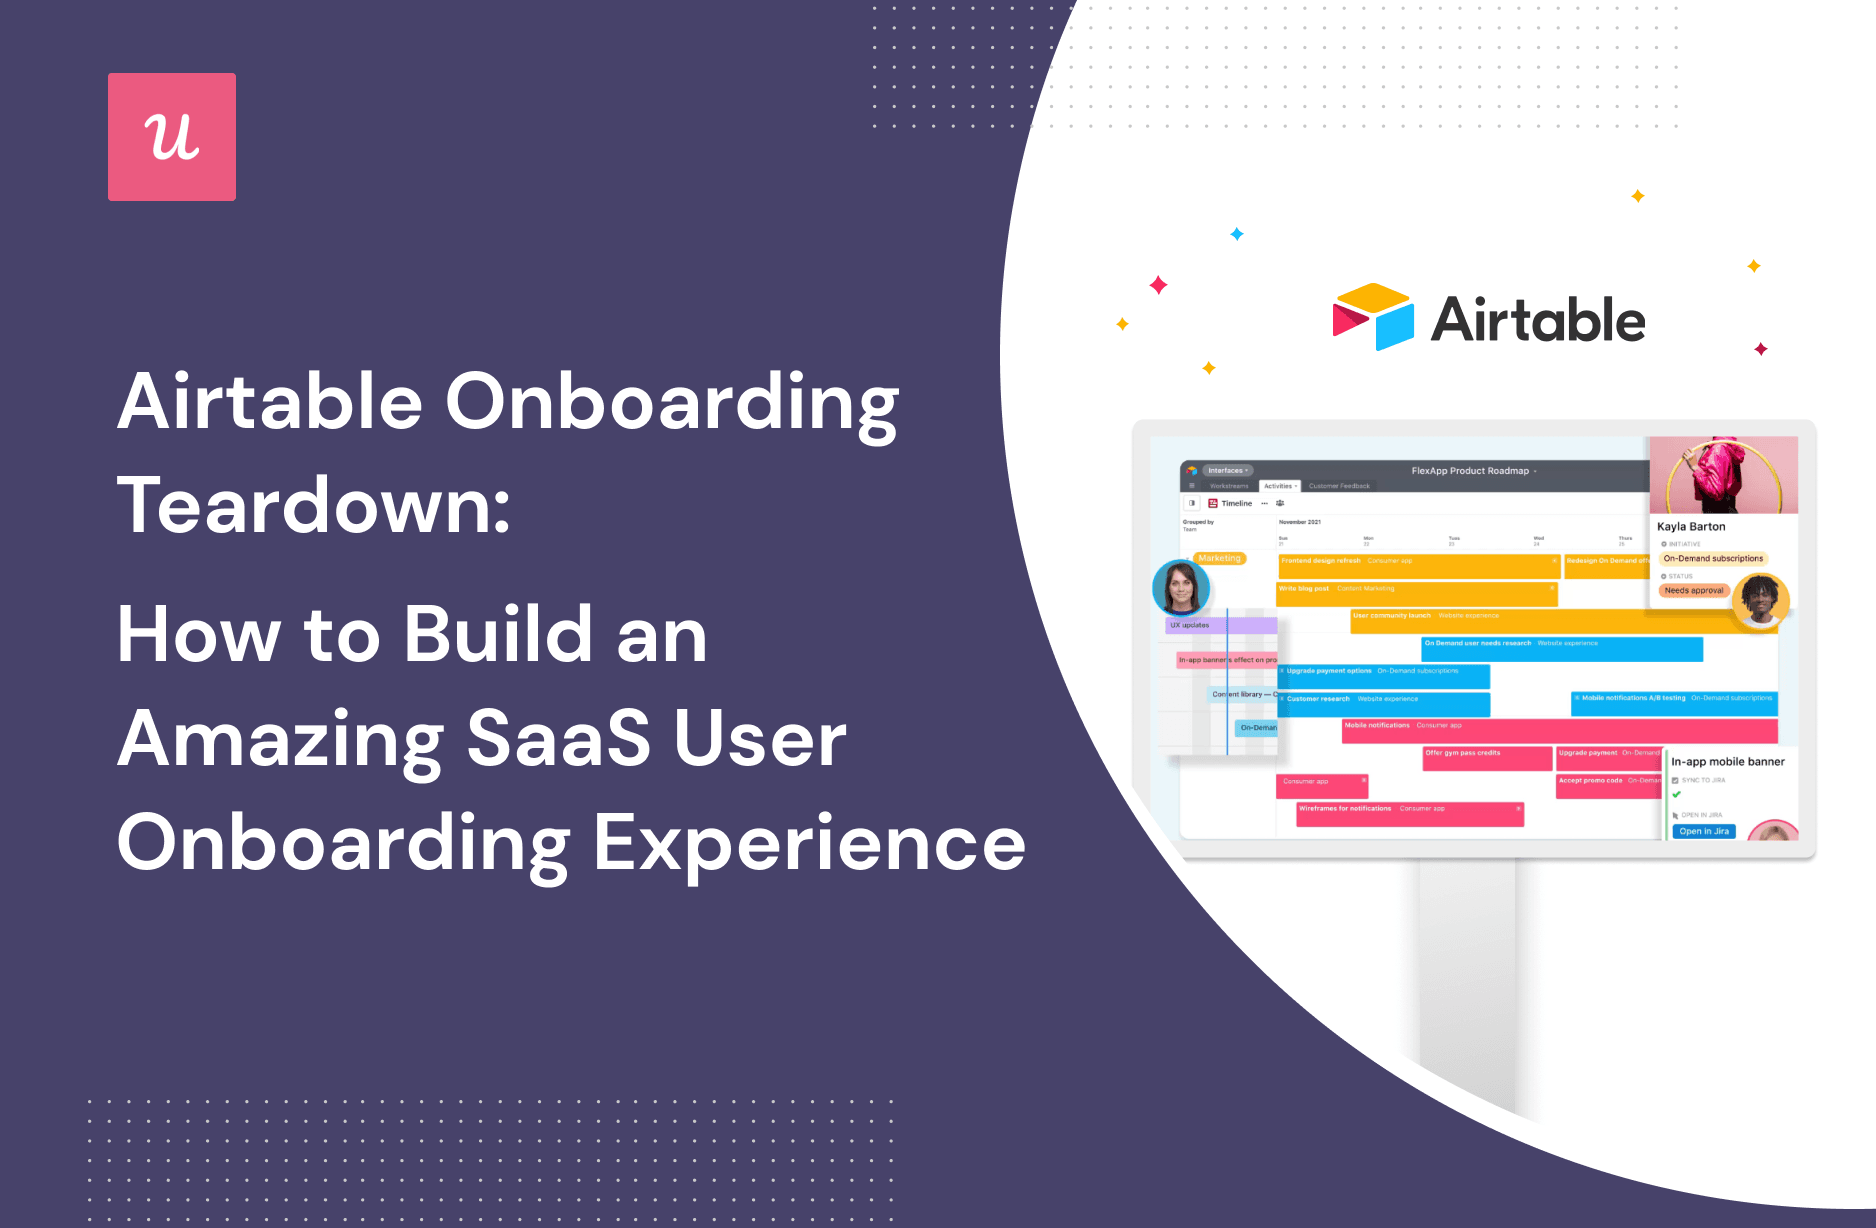 Airtable Onboarding Teardown: How to Build an Amazing SaaS User Onboarding Experience